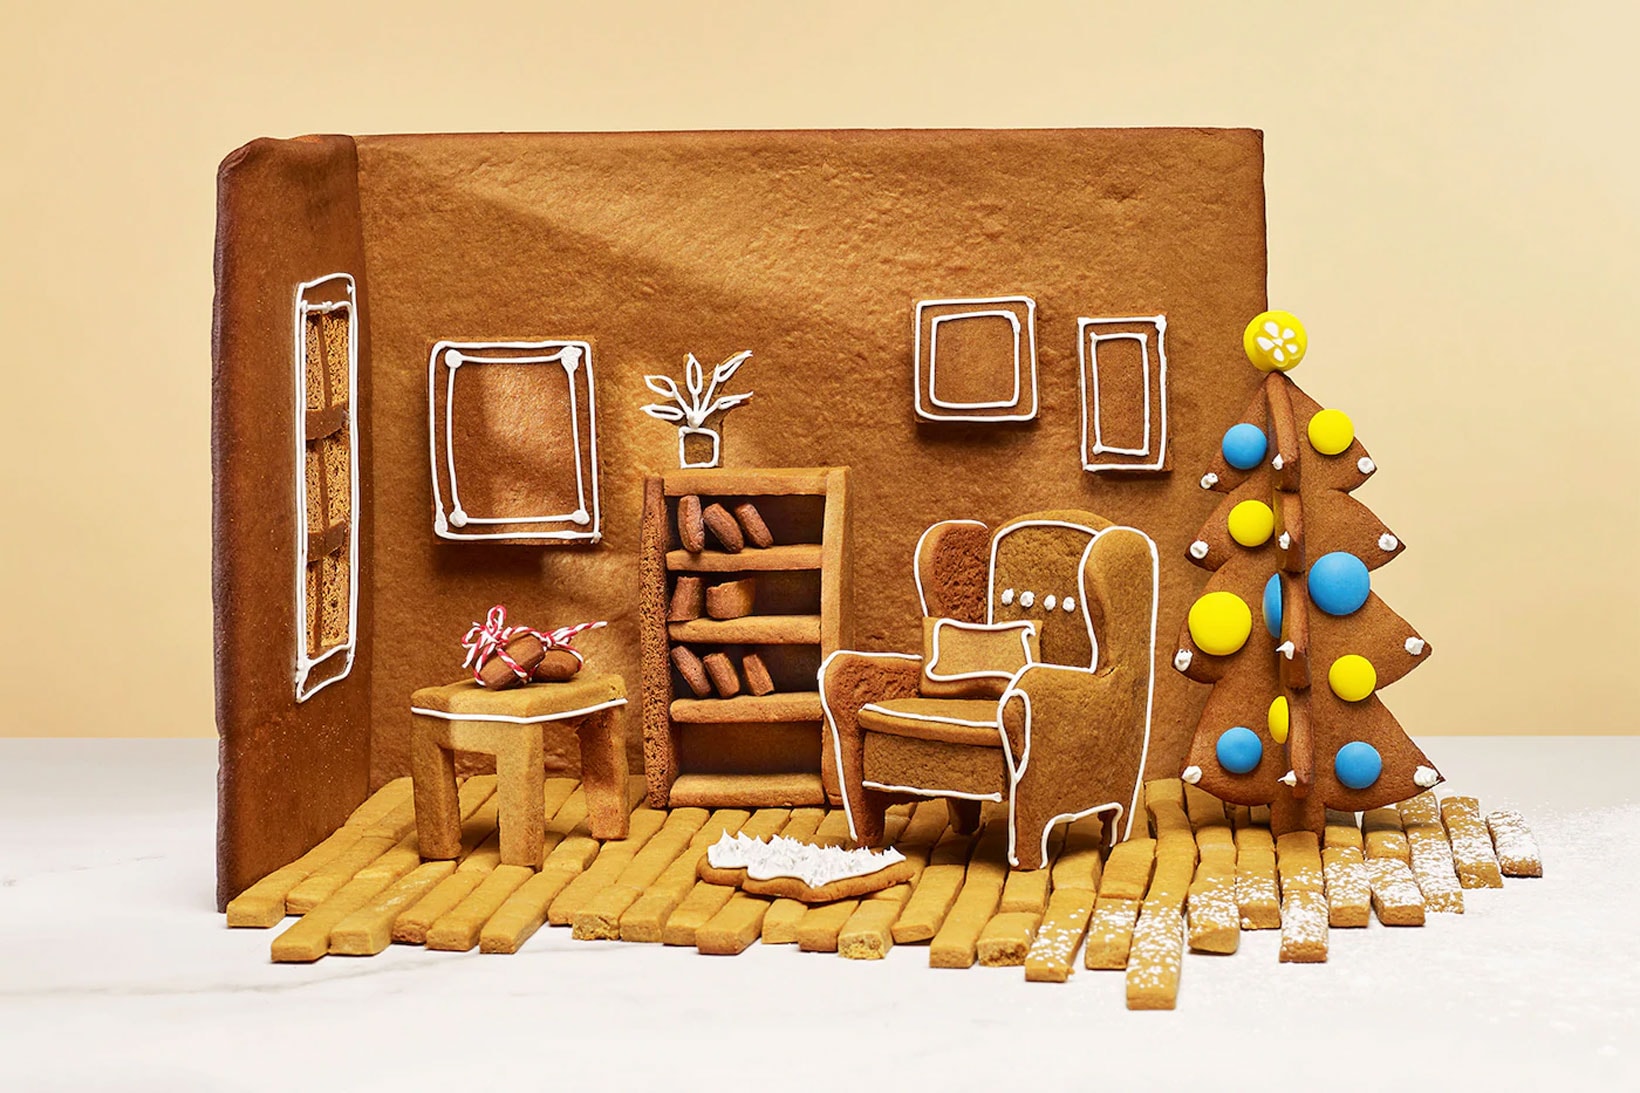 ikea christmas gingerbread home furniture baking kit cookies holiday activities canada